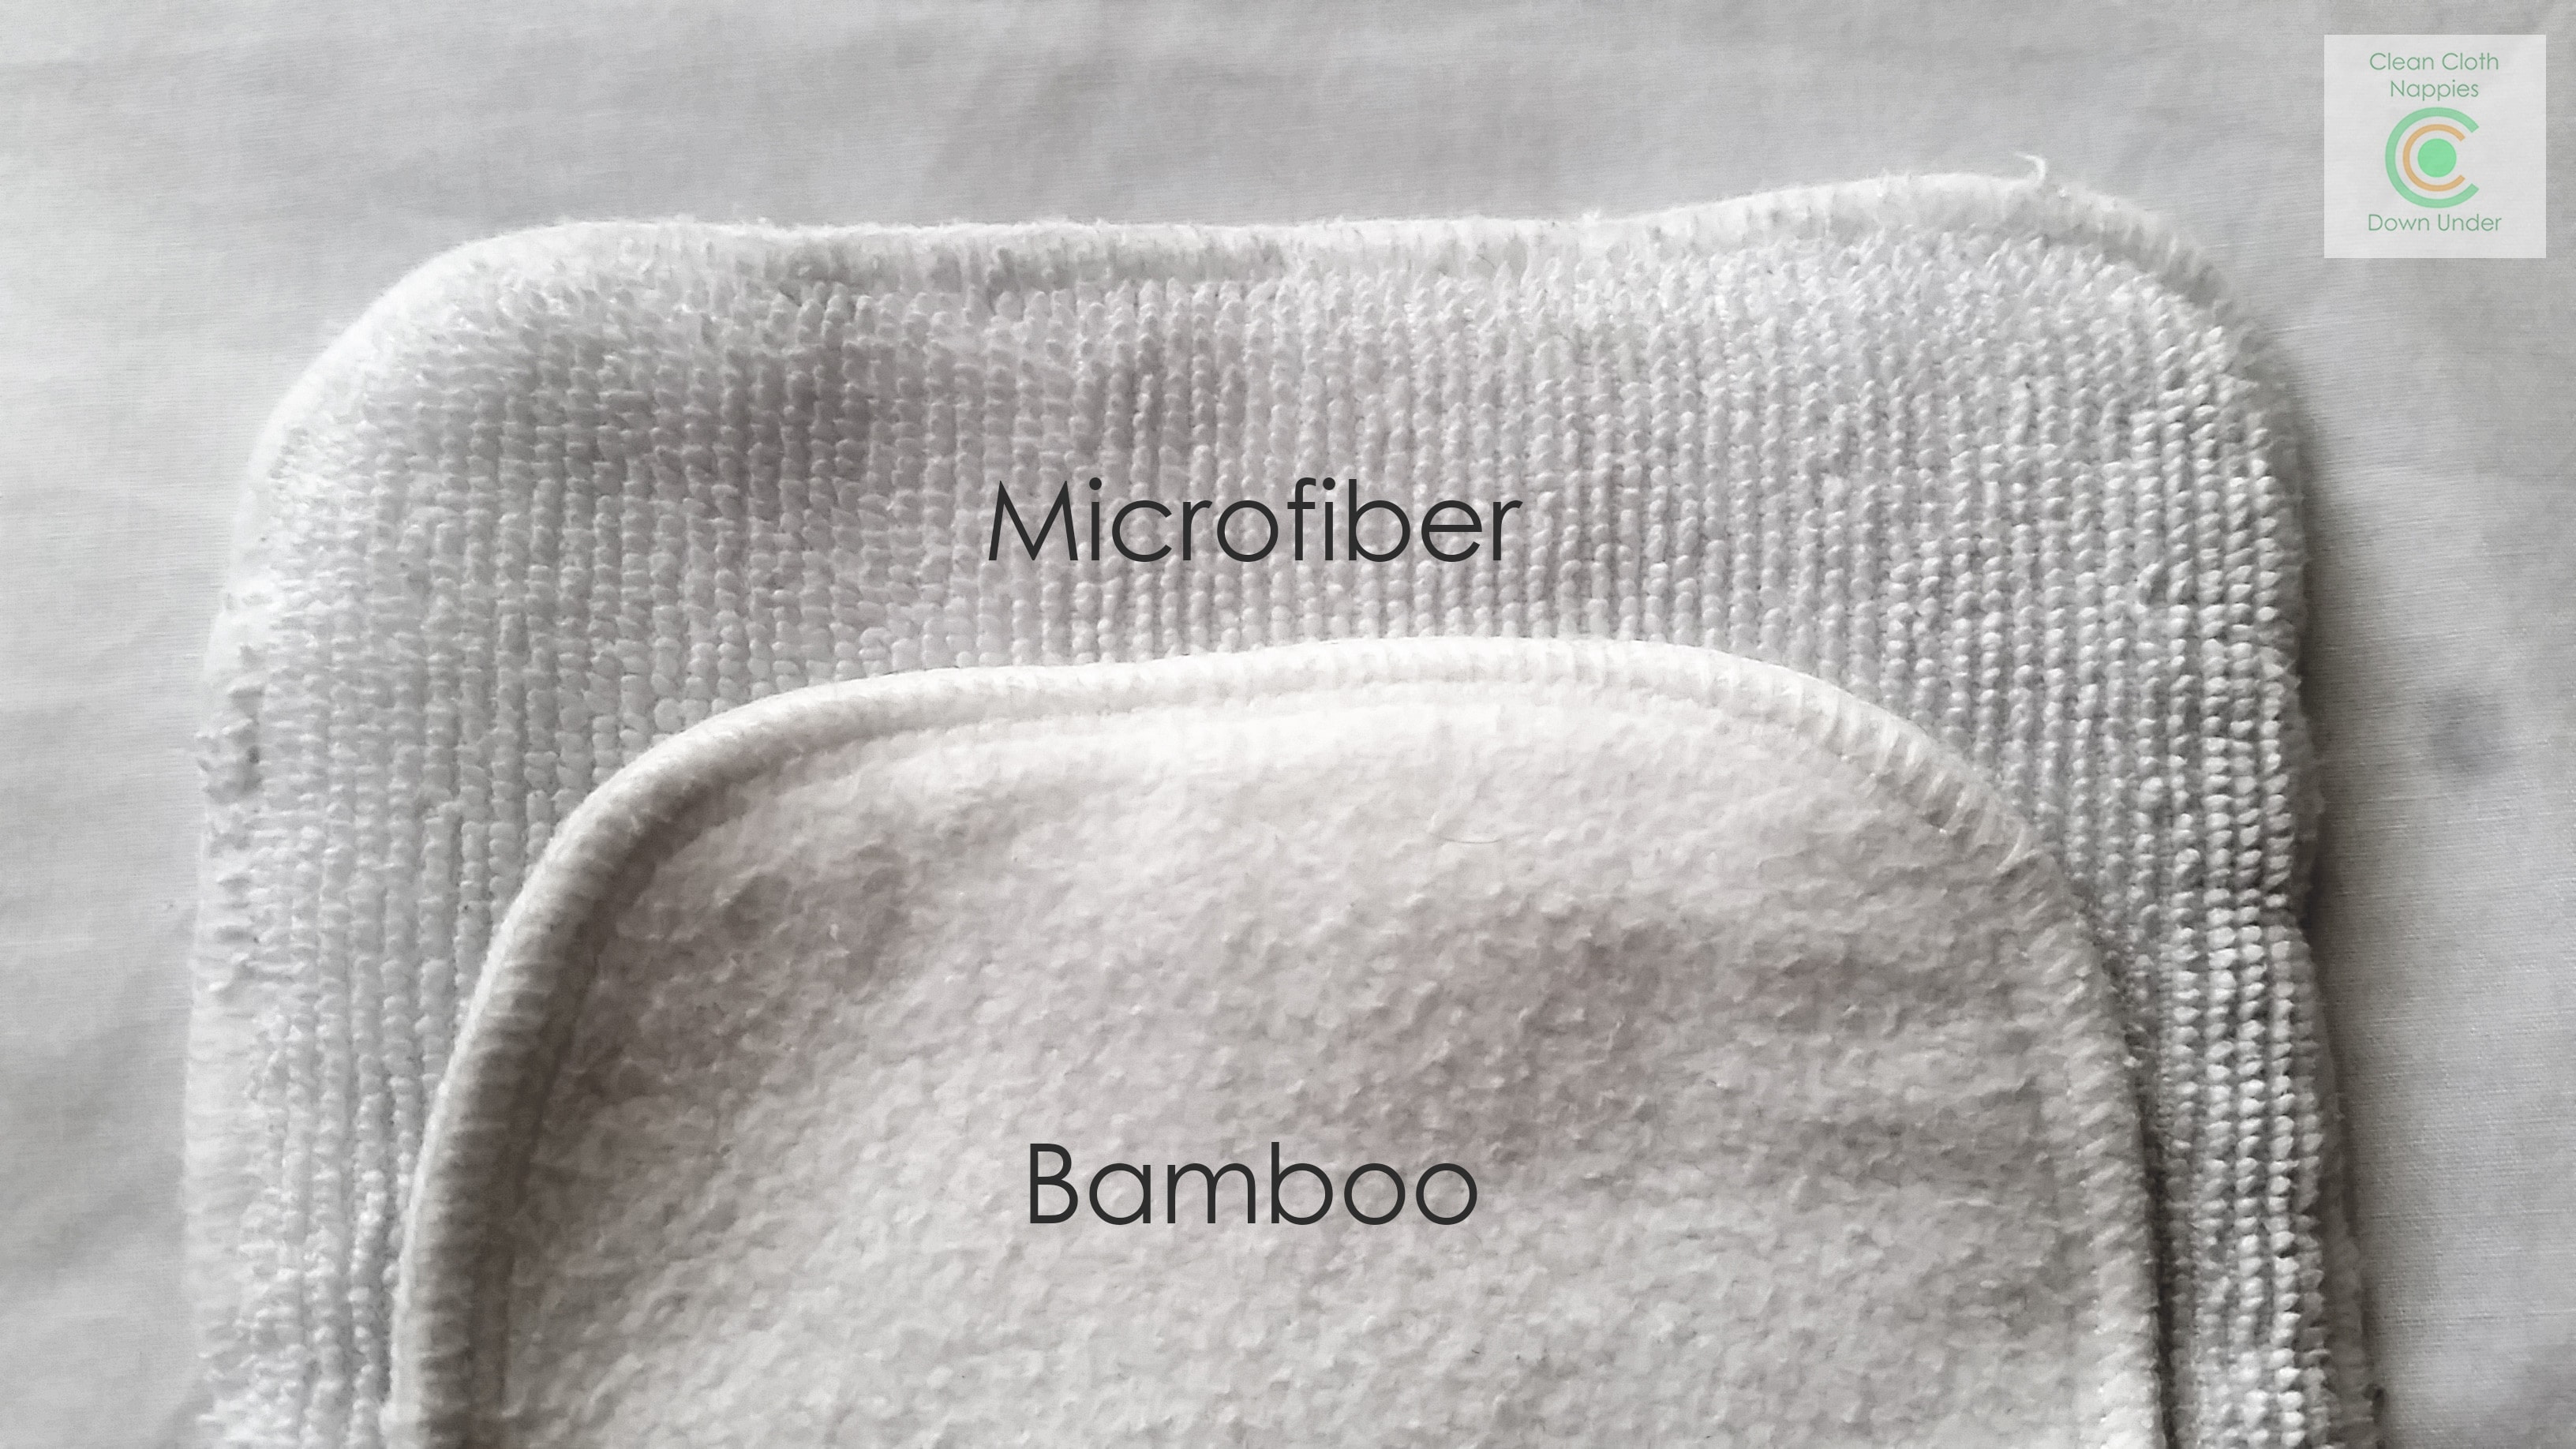 Hemp Cloth Diaper Inserts Best for Absorbency